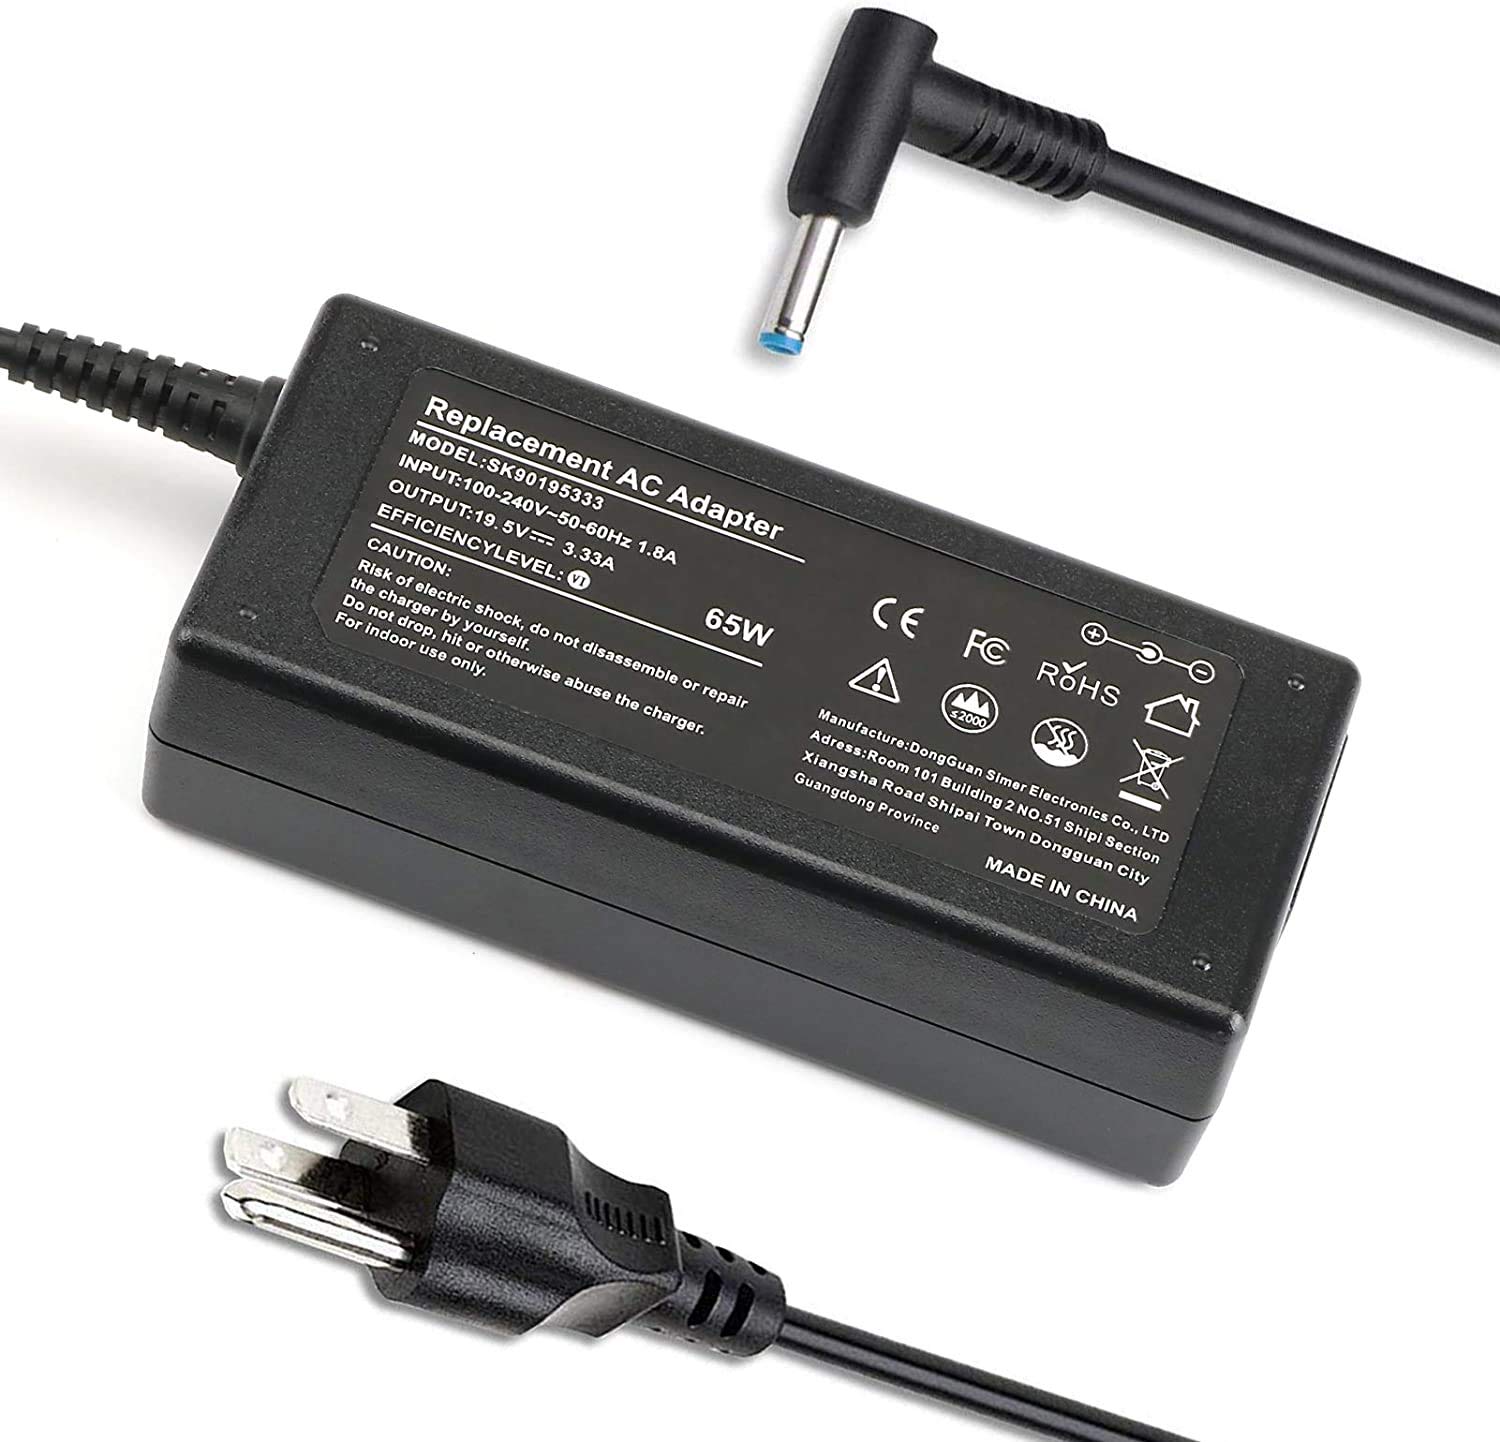 What Is The Correct Charger For My HP Envy X360 M6 Convertible Laptop